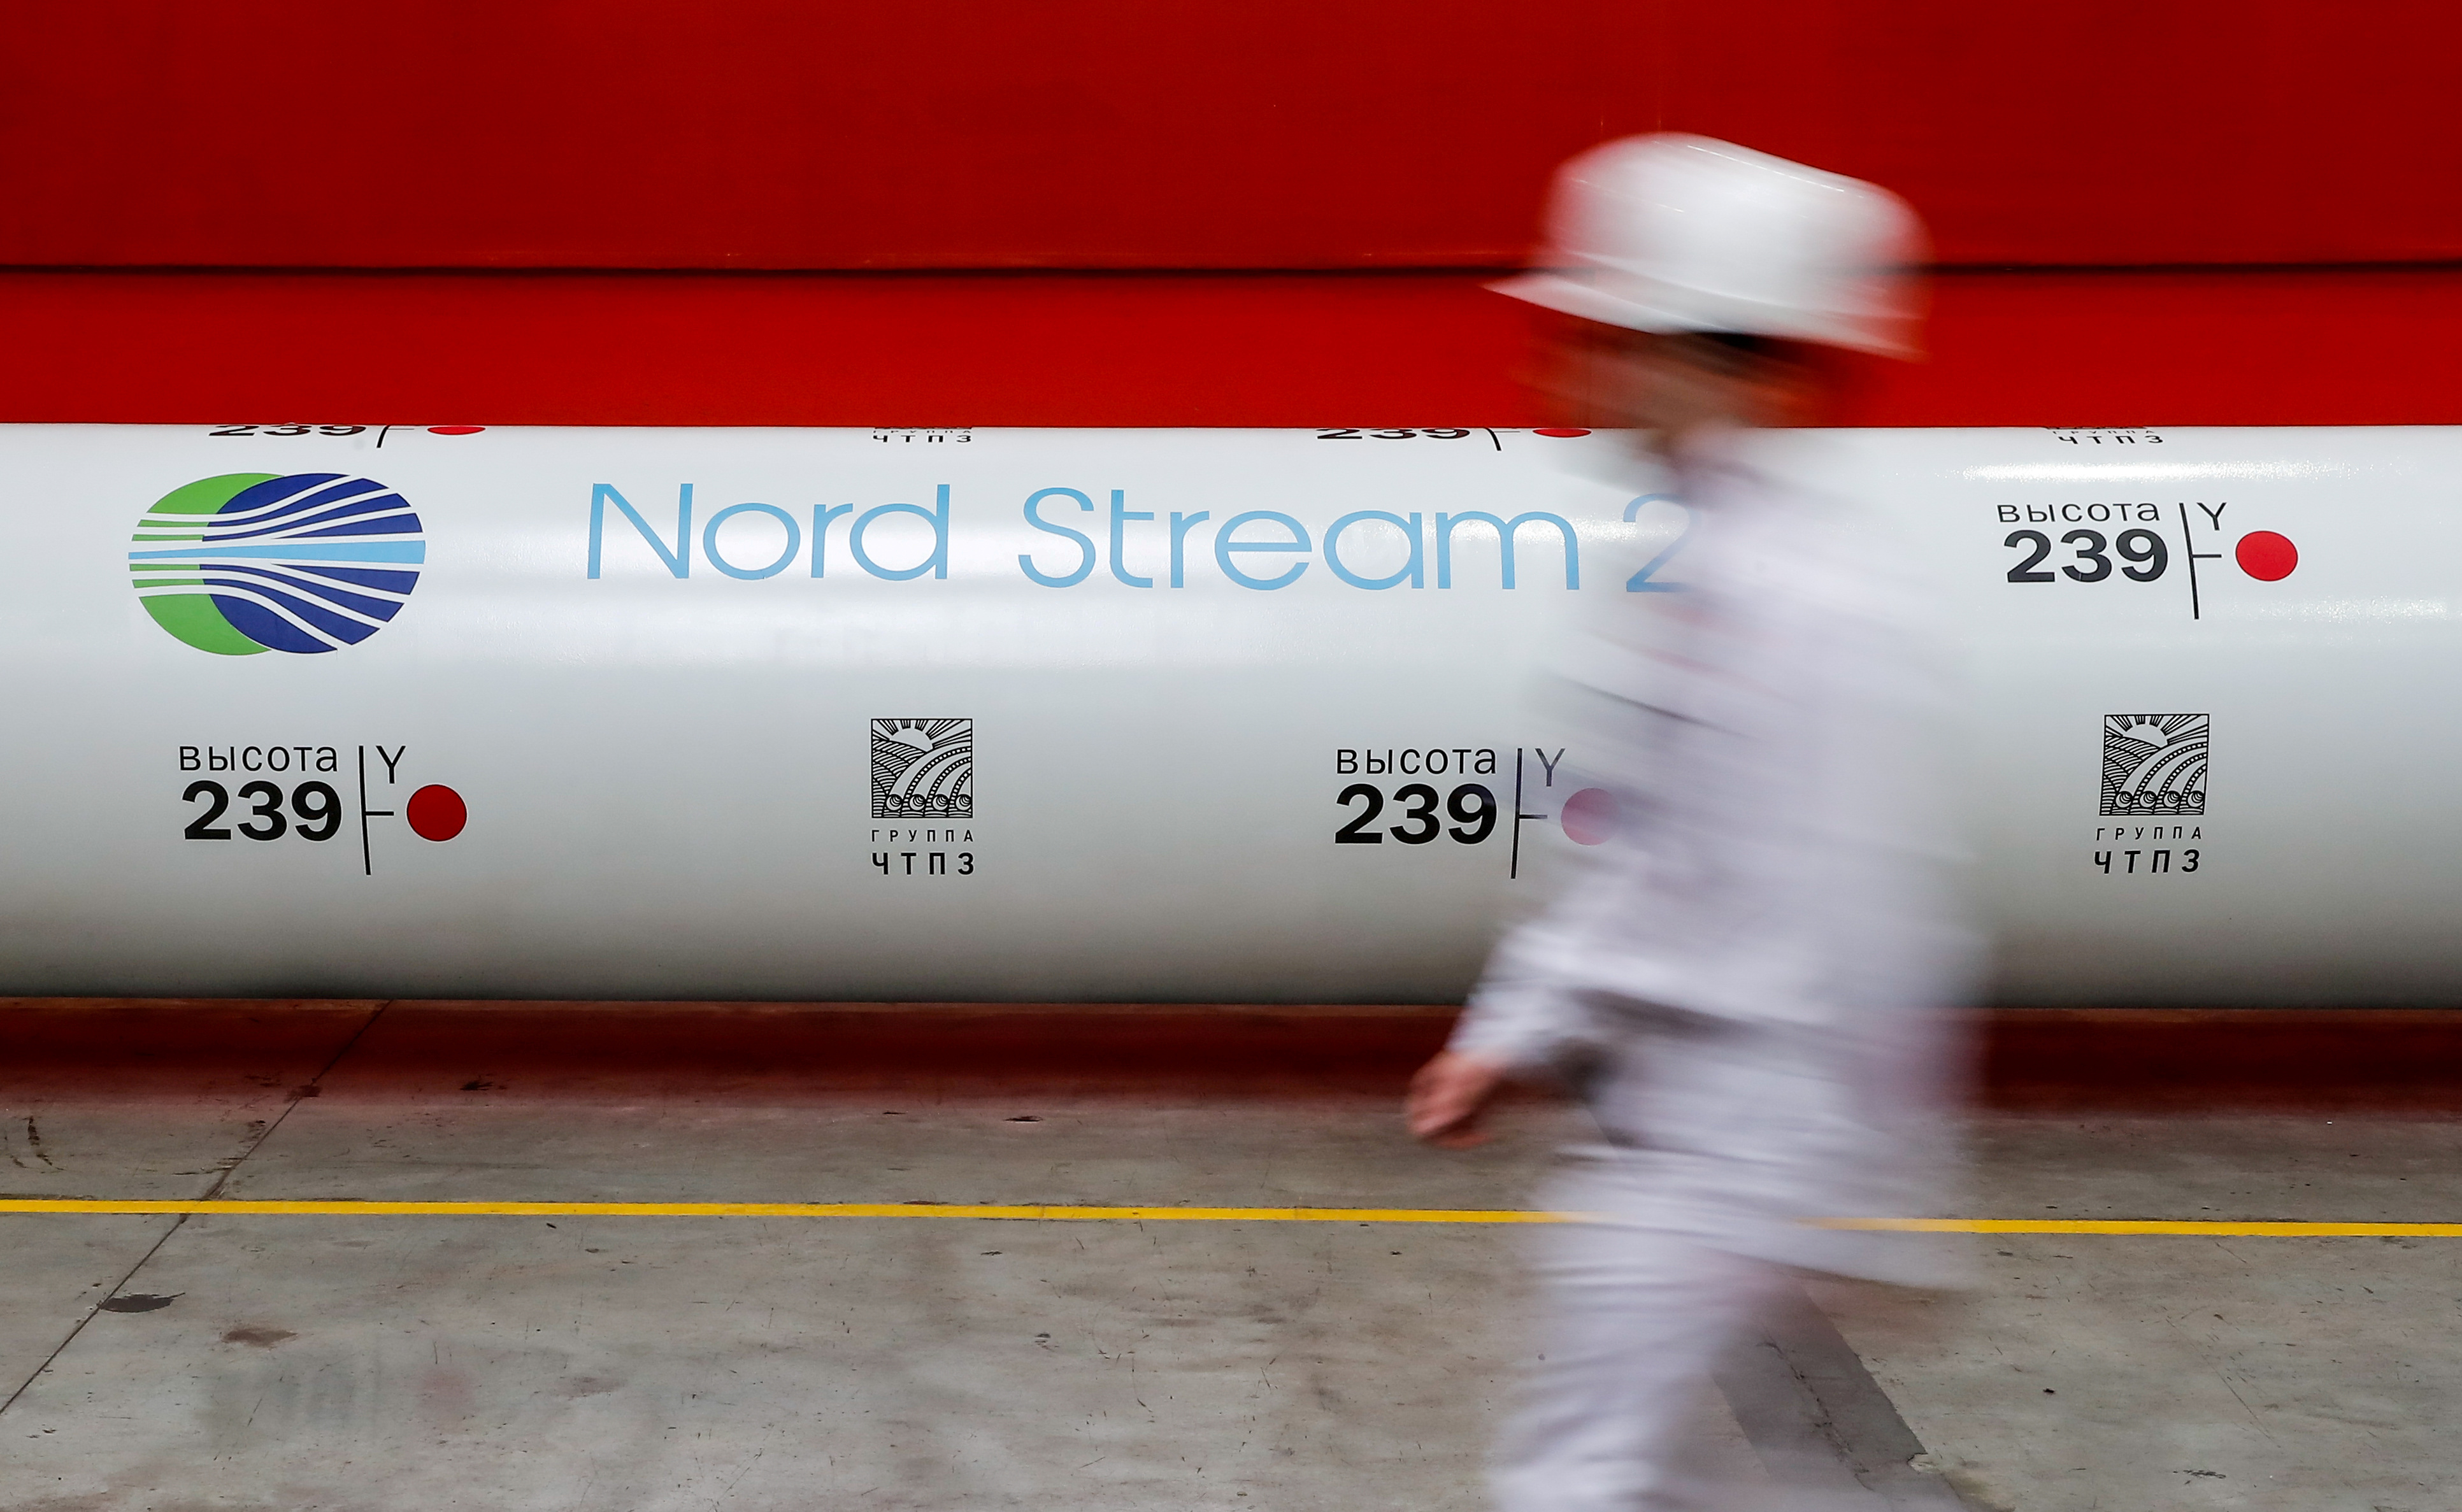 The logo of the Nord Stream 2 gas pipeline project is seen on a pipe at Chelyabinsk pipe rolling plant in Chelyabinsk